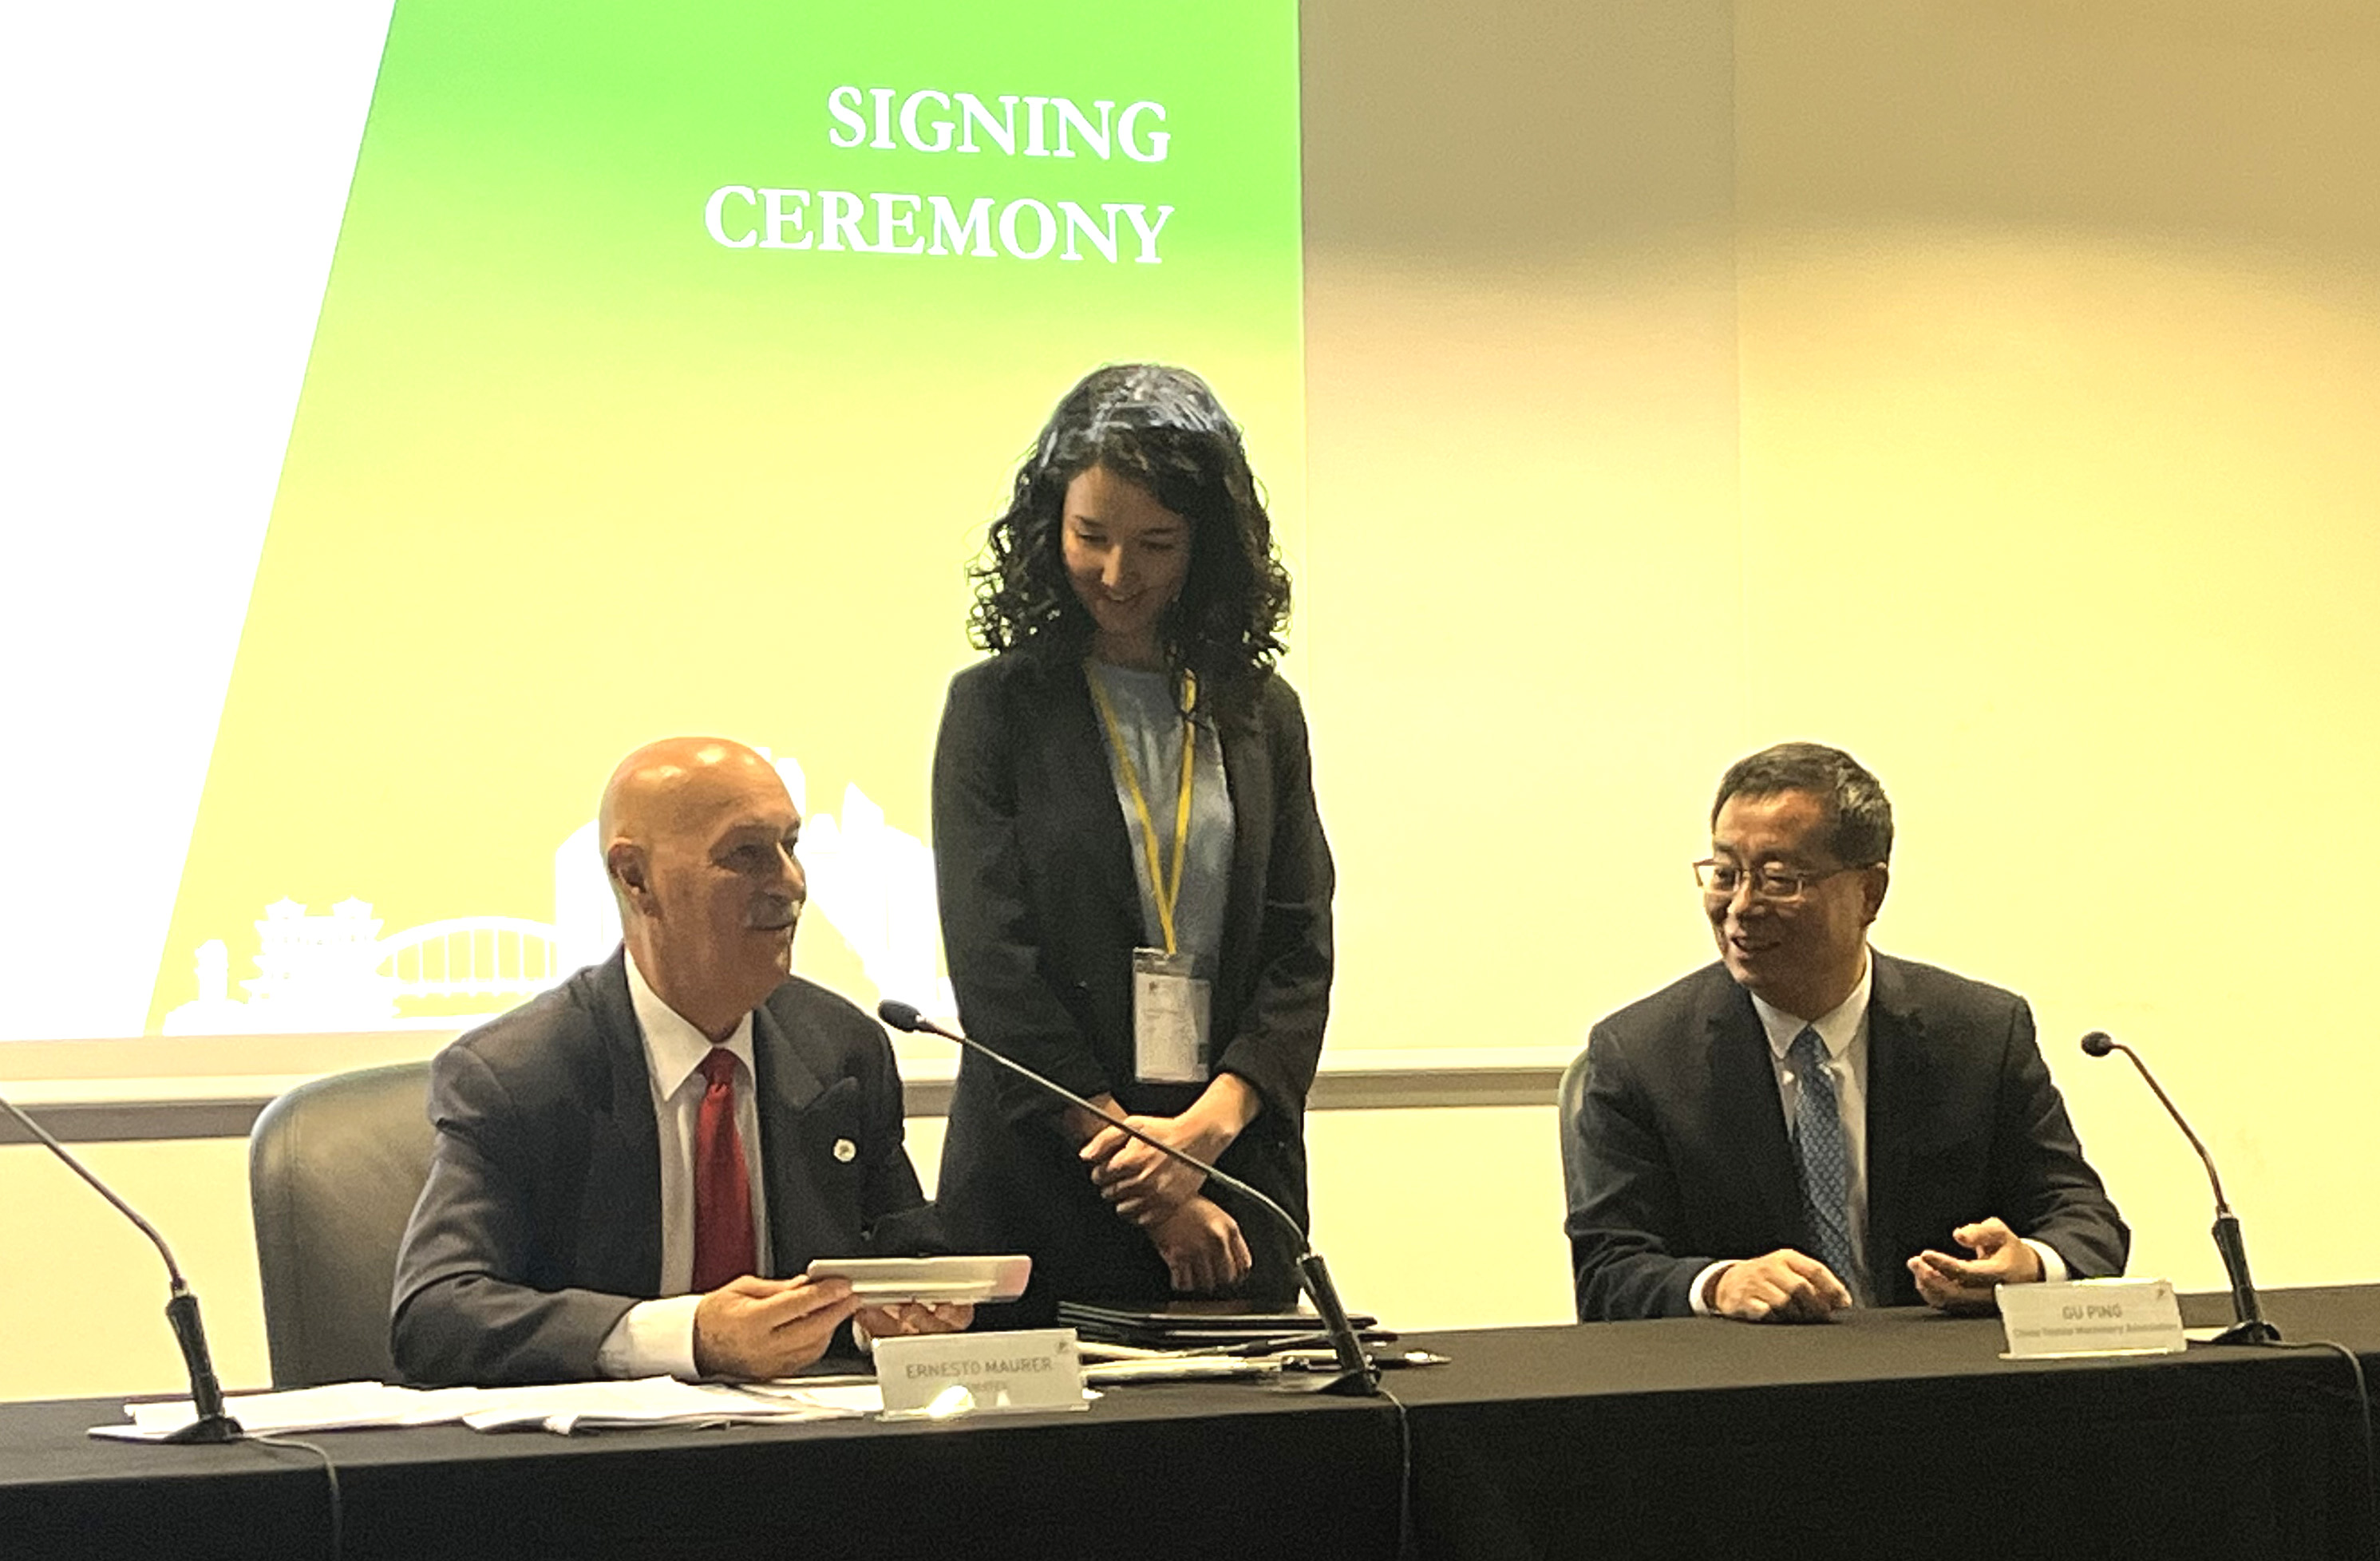 Cematex president Ernesto Maurer and CTMA Gu Ping sign the agreement to jointly hold the next ITMA ASIA + CITME in Singapore in 2025. © A.Wilson